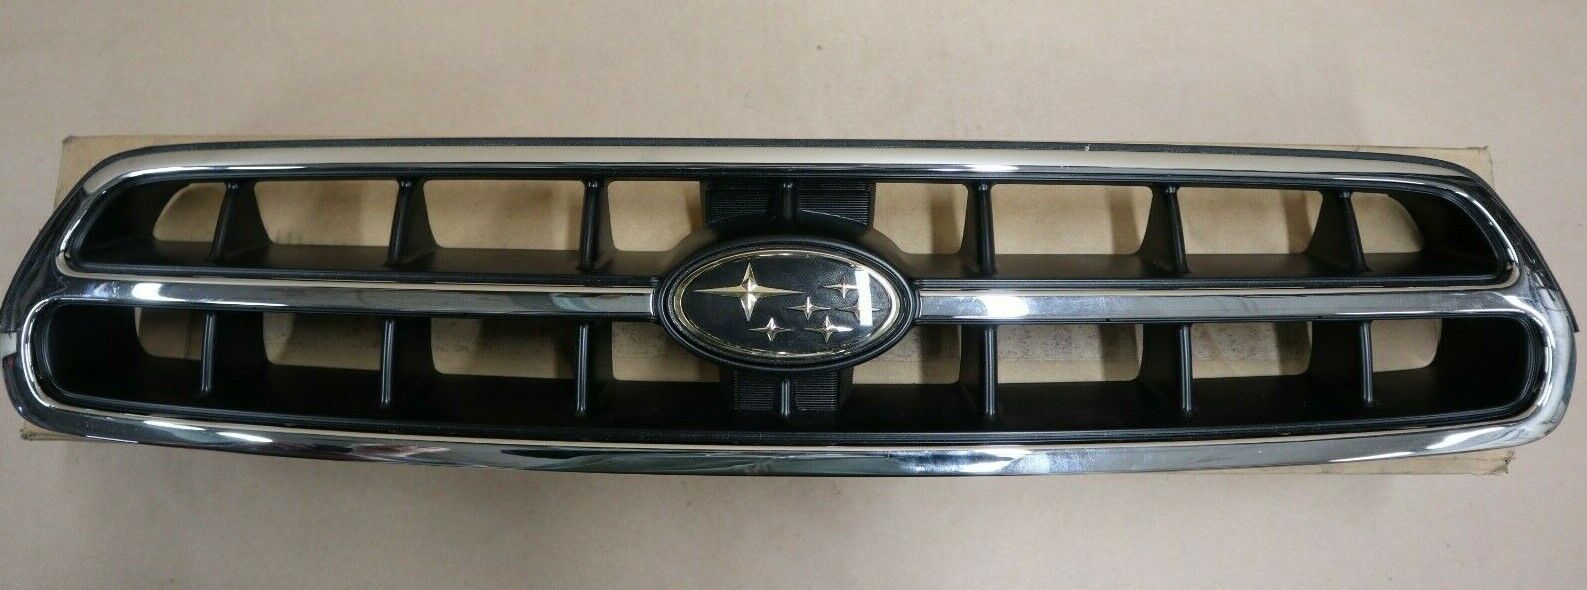 j1010ae010 Front grille mask chrome Grid Legacy Outback subaru genuine parts